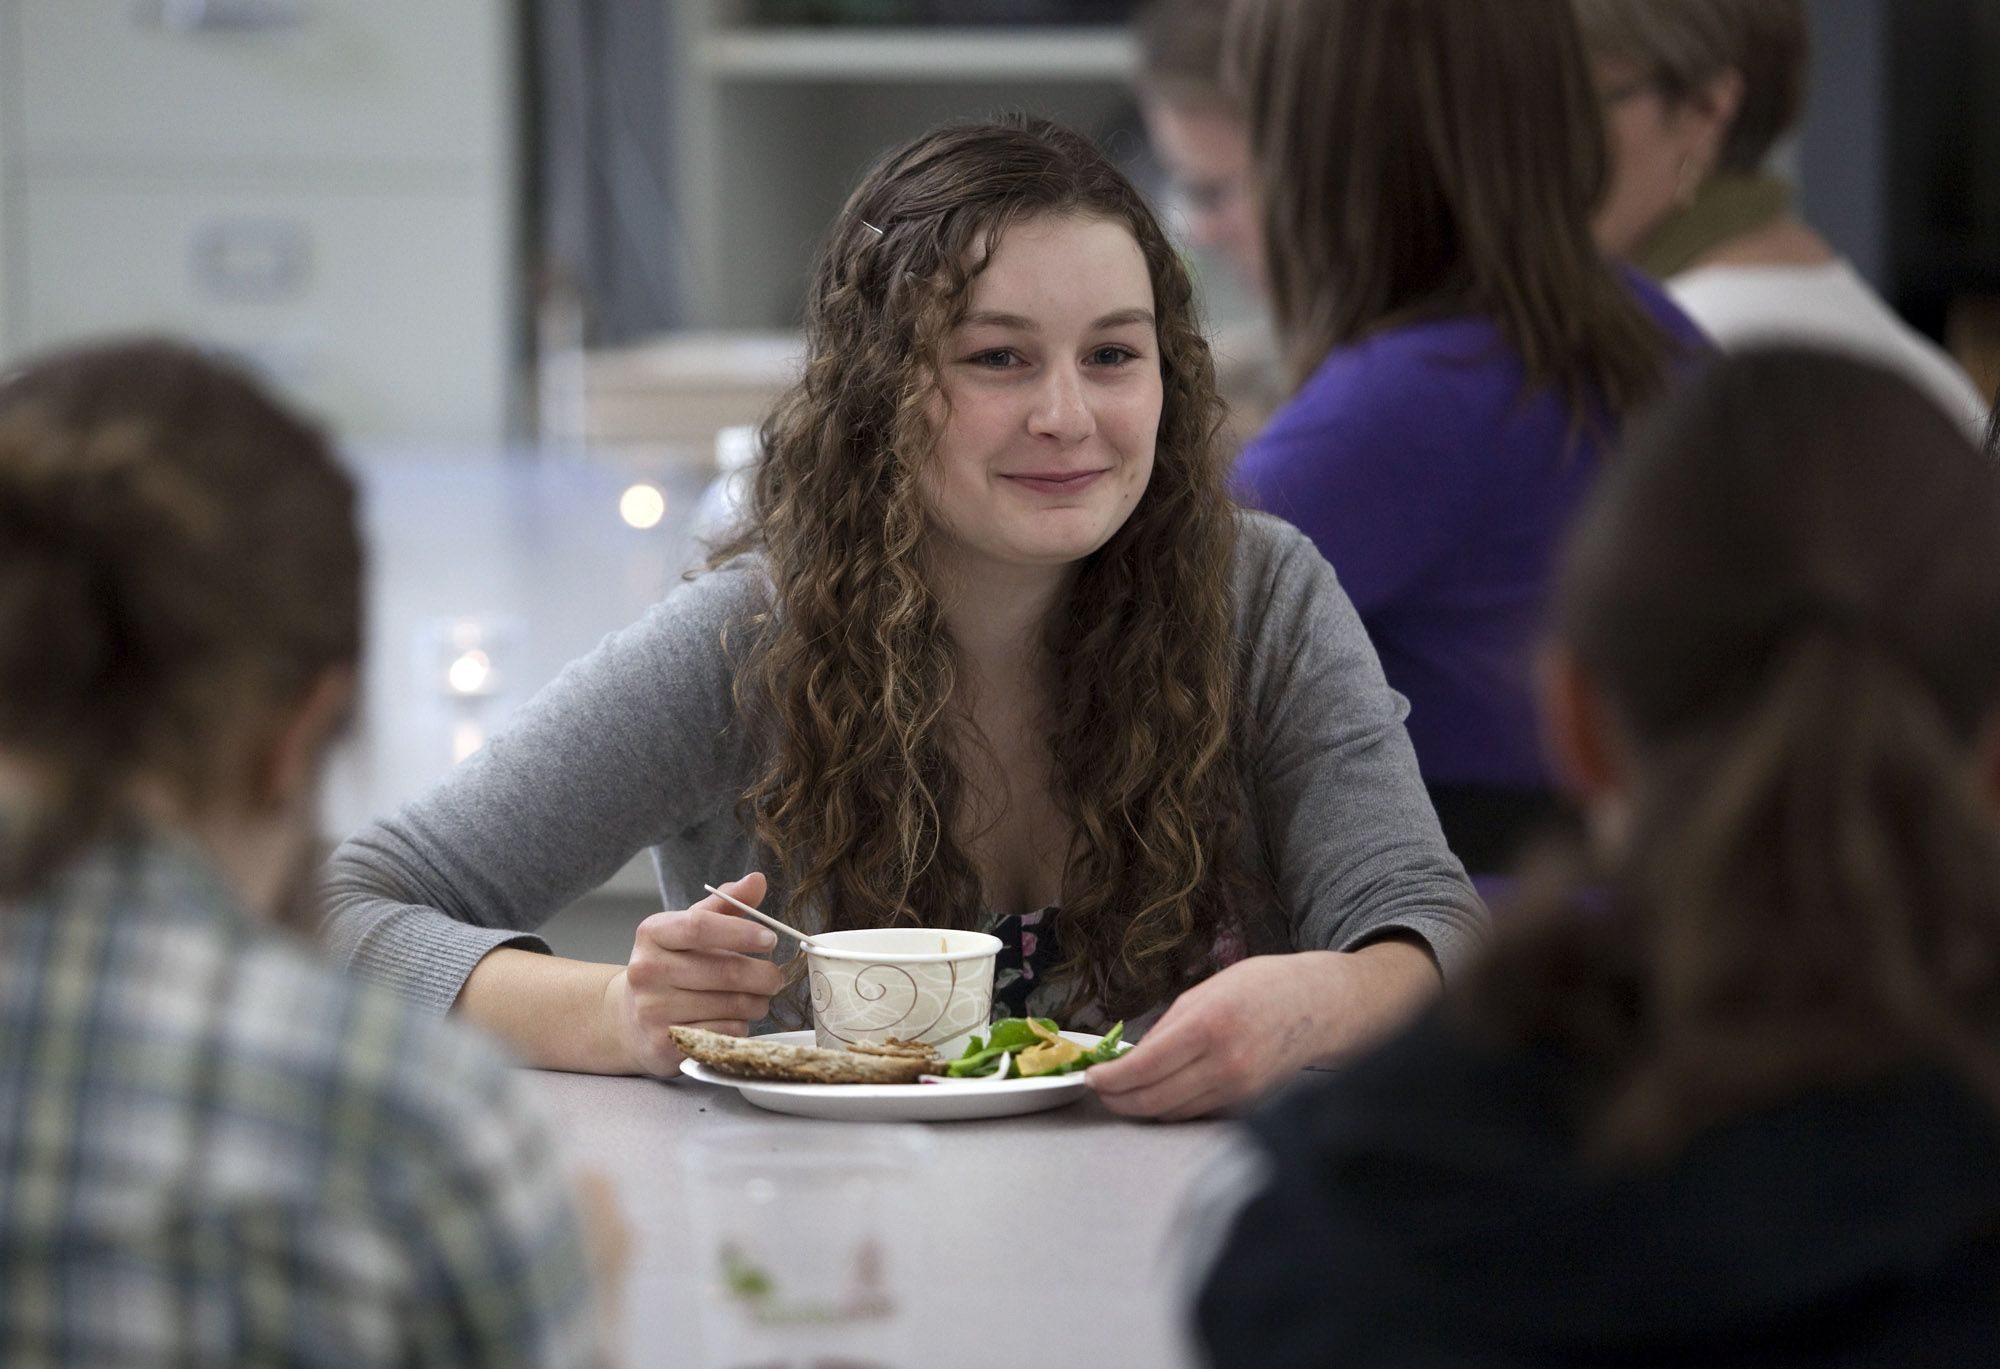 Vancouver School of Arts and Academics sophomore Justine Hanrahan organized the 100 Mile Lunch, which featured food grown or produced within 100 miles of the school.